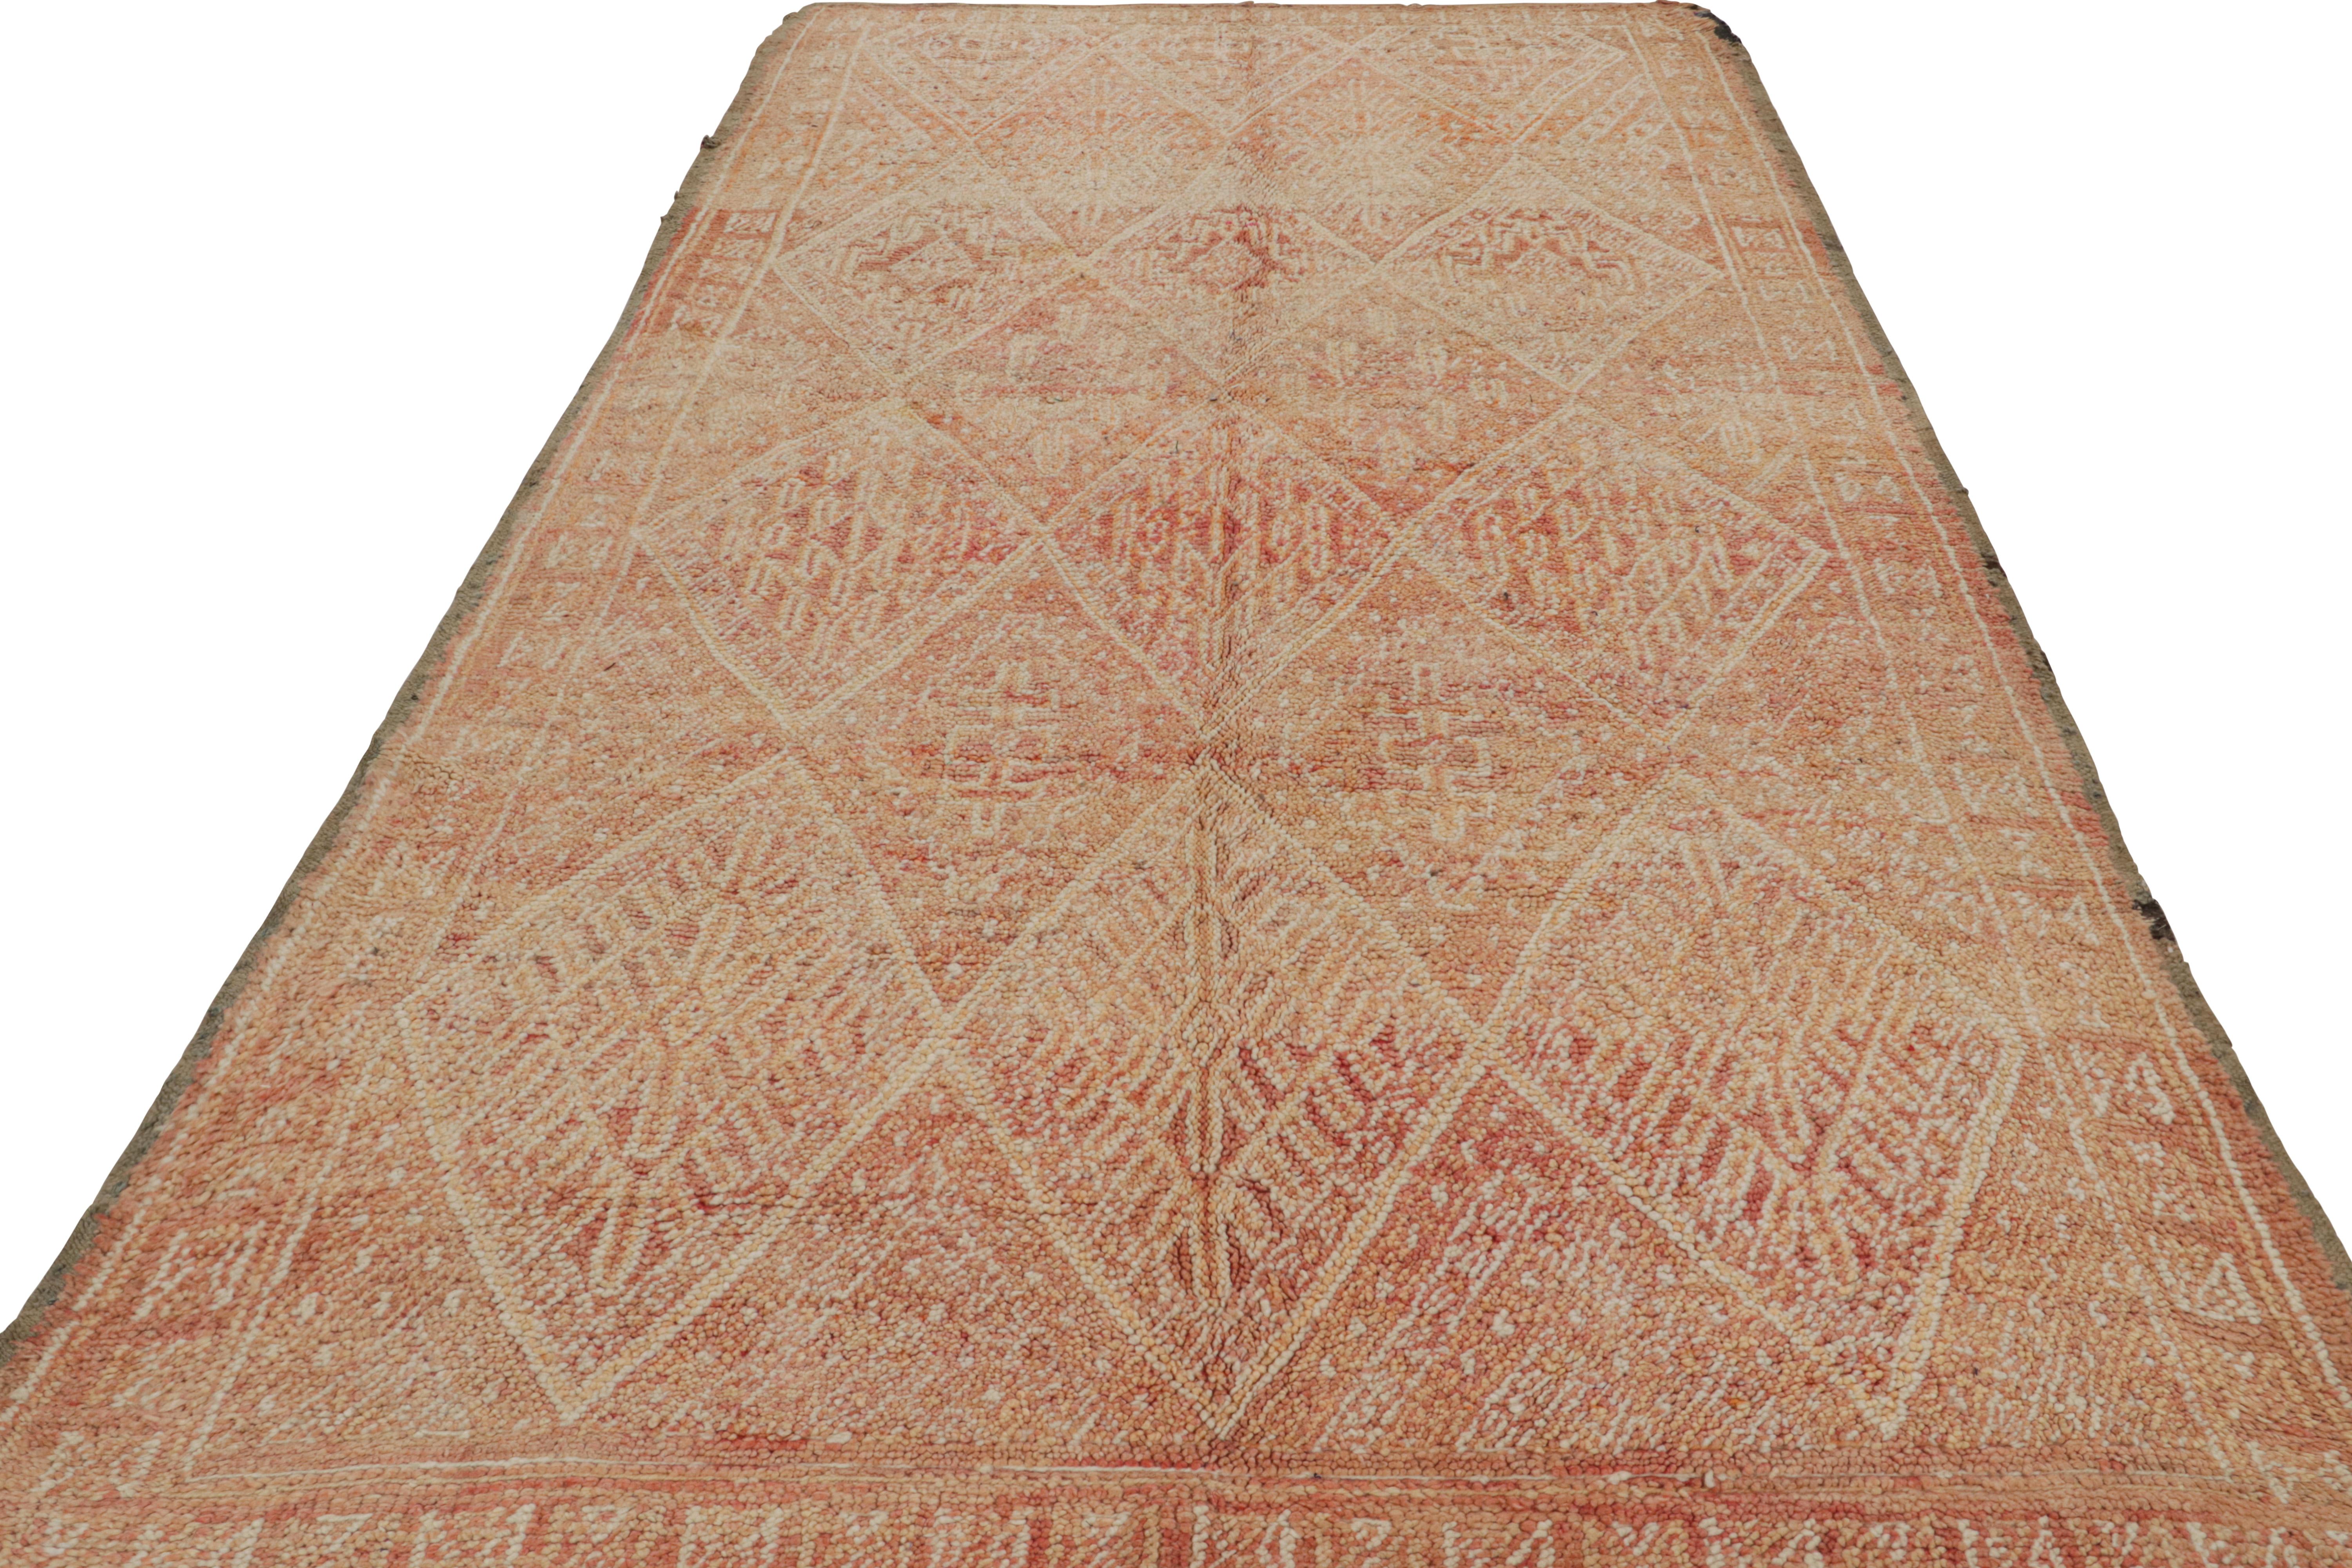 Tribal Vintage Azilal Moroccan rug with Red, Orange and White Patterns by Rug & Kilim For Sale